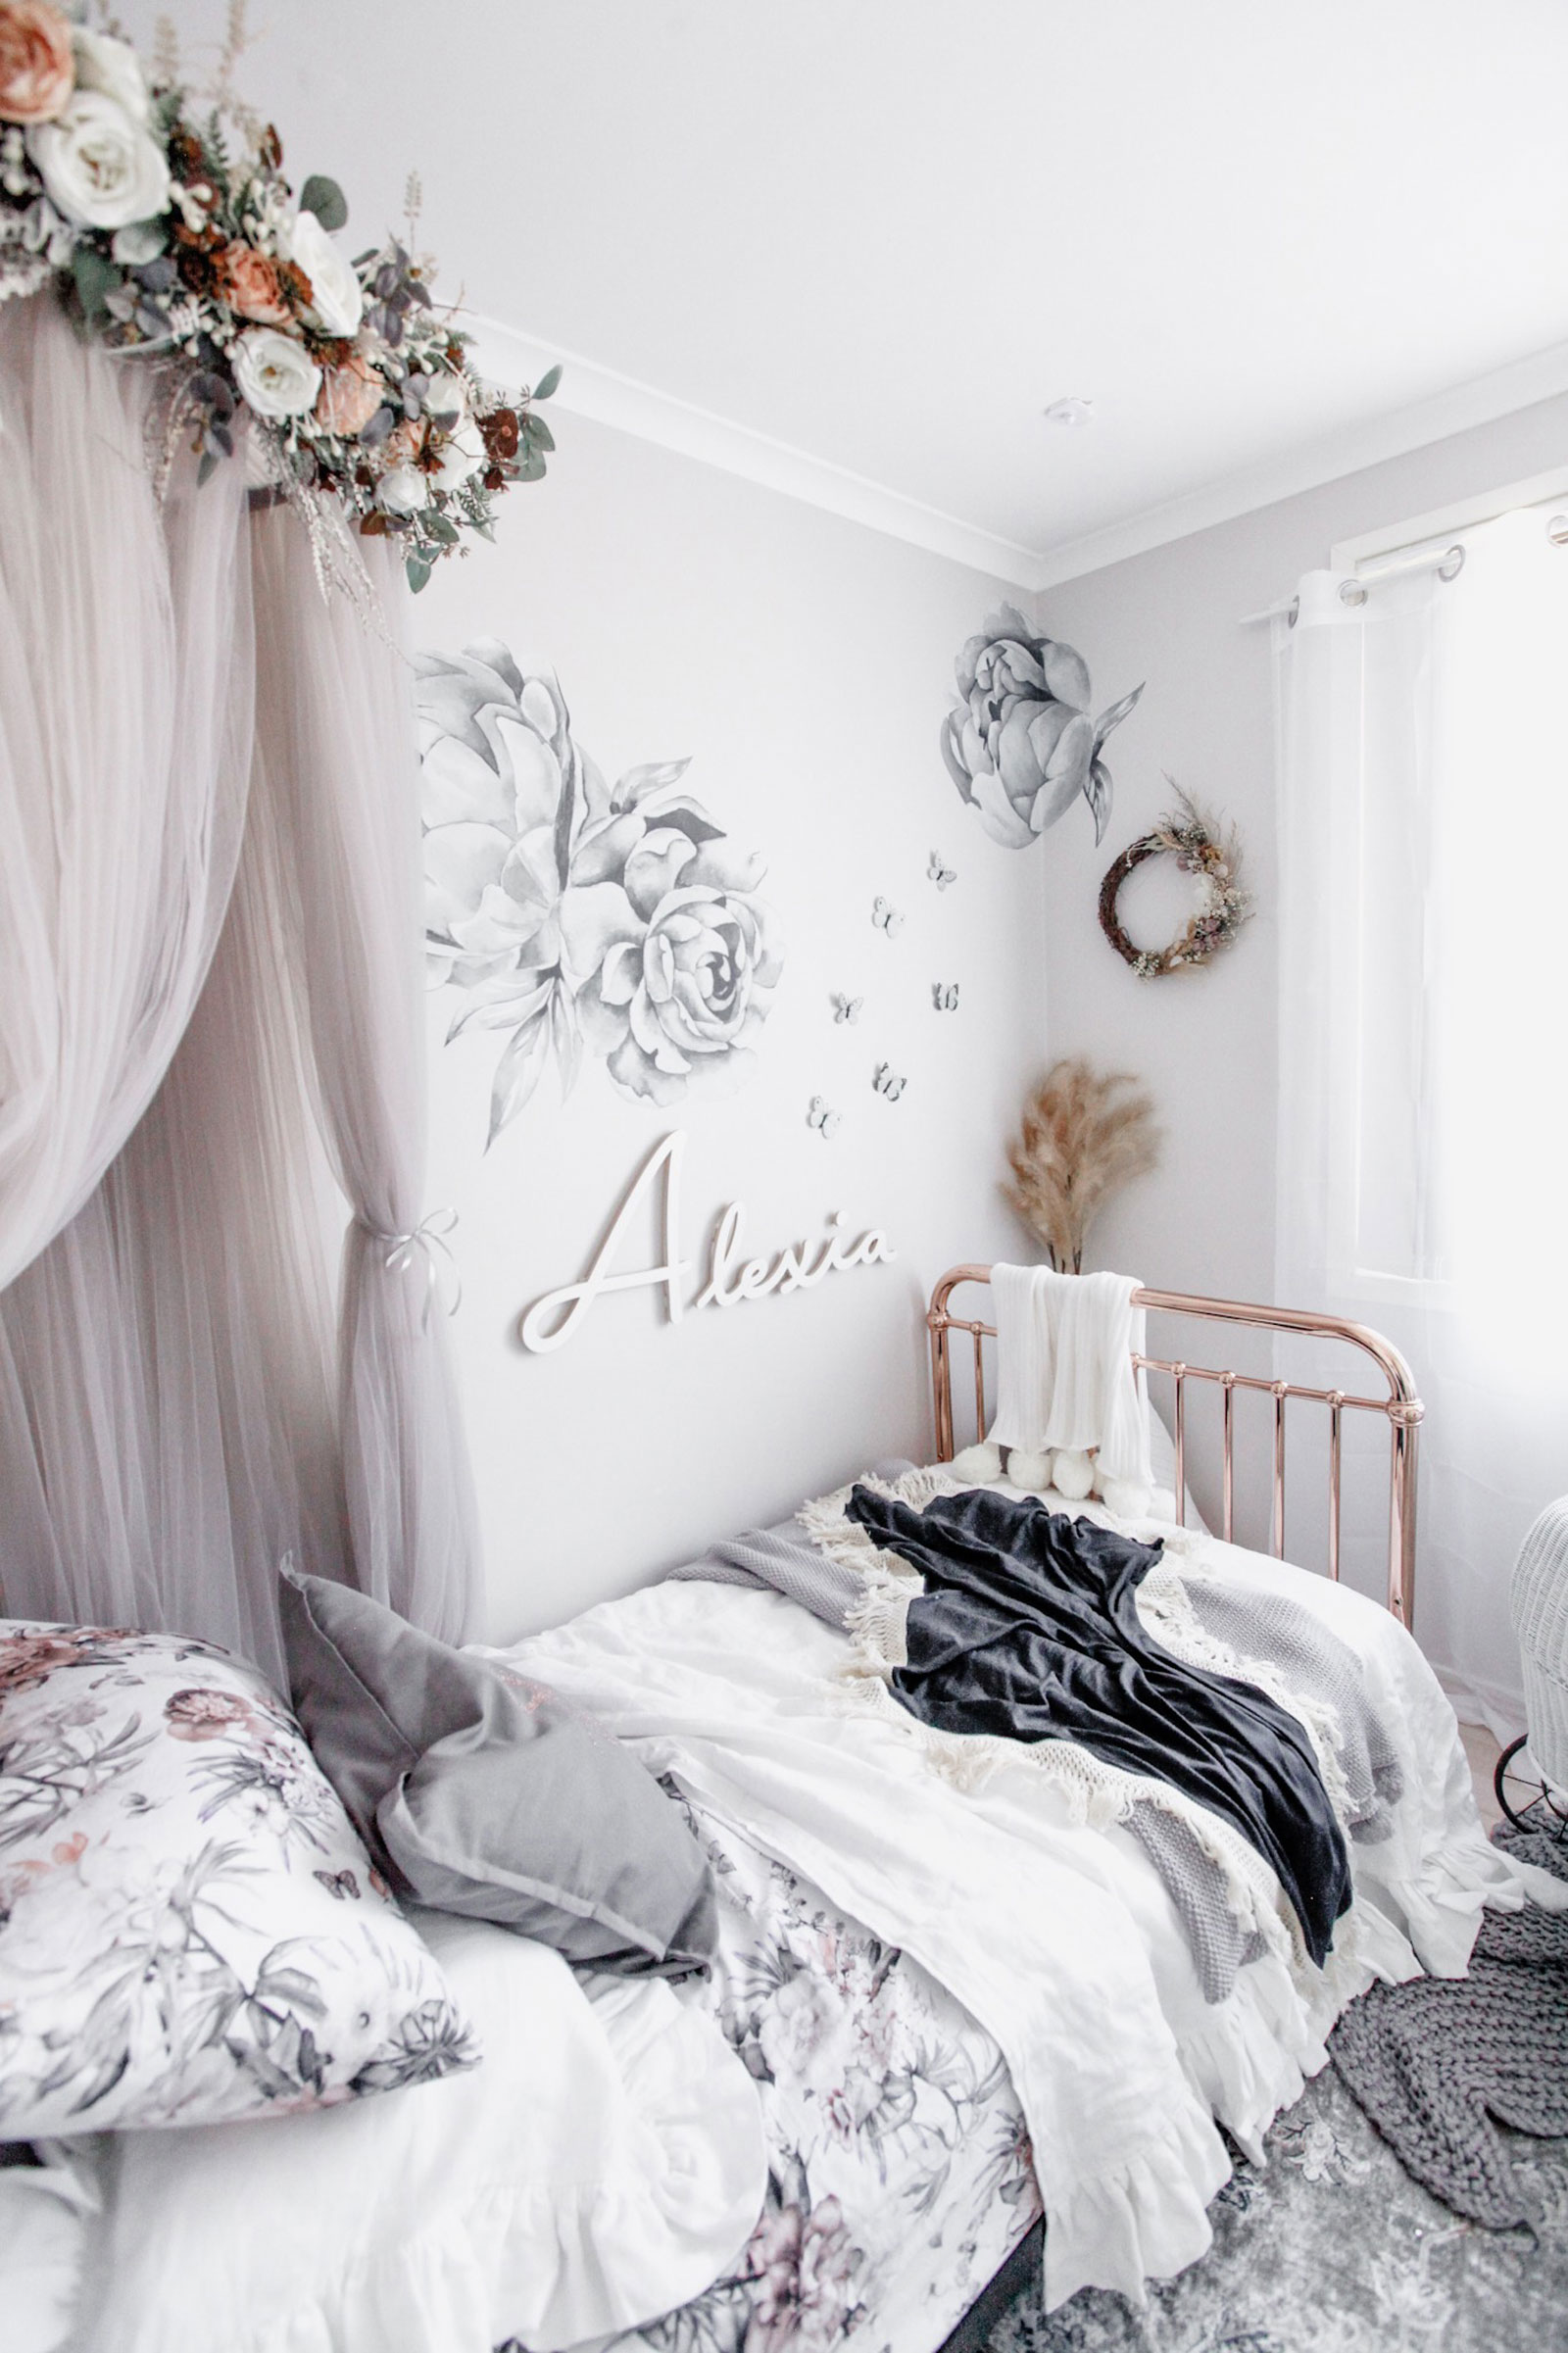 ROOMTOUR : ALEXIA'S WHIMSICAL GREY BEDROOM WITH FLORALS - Kids Interiors
